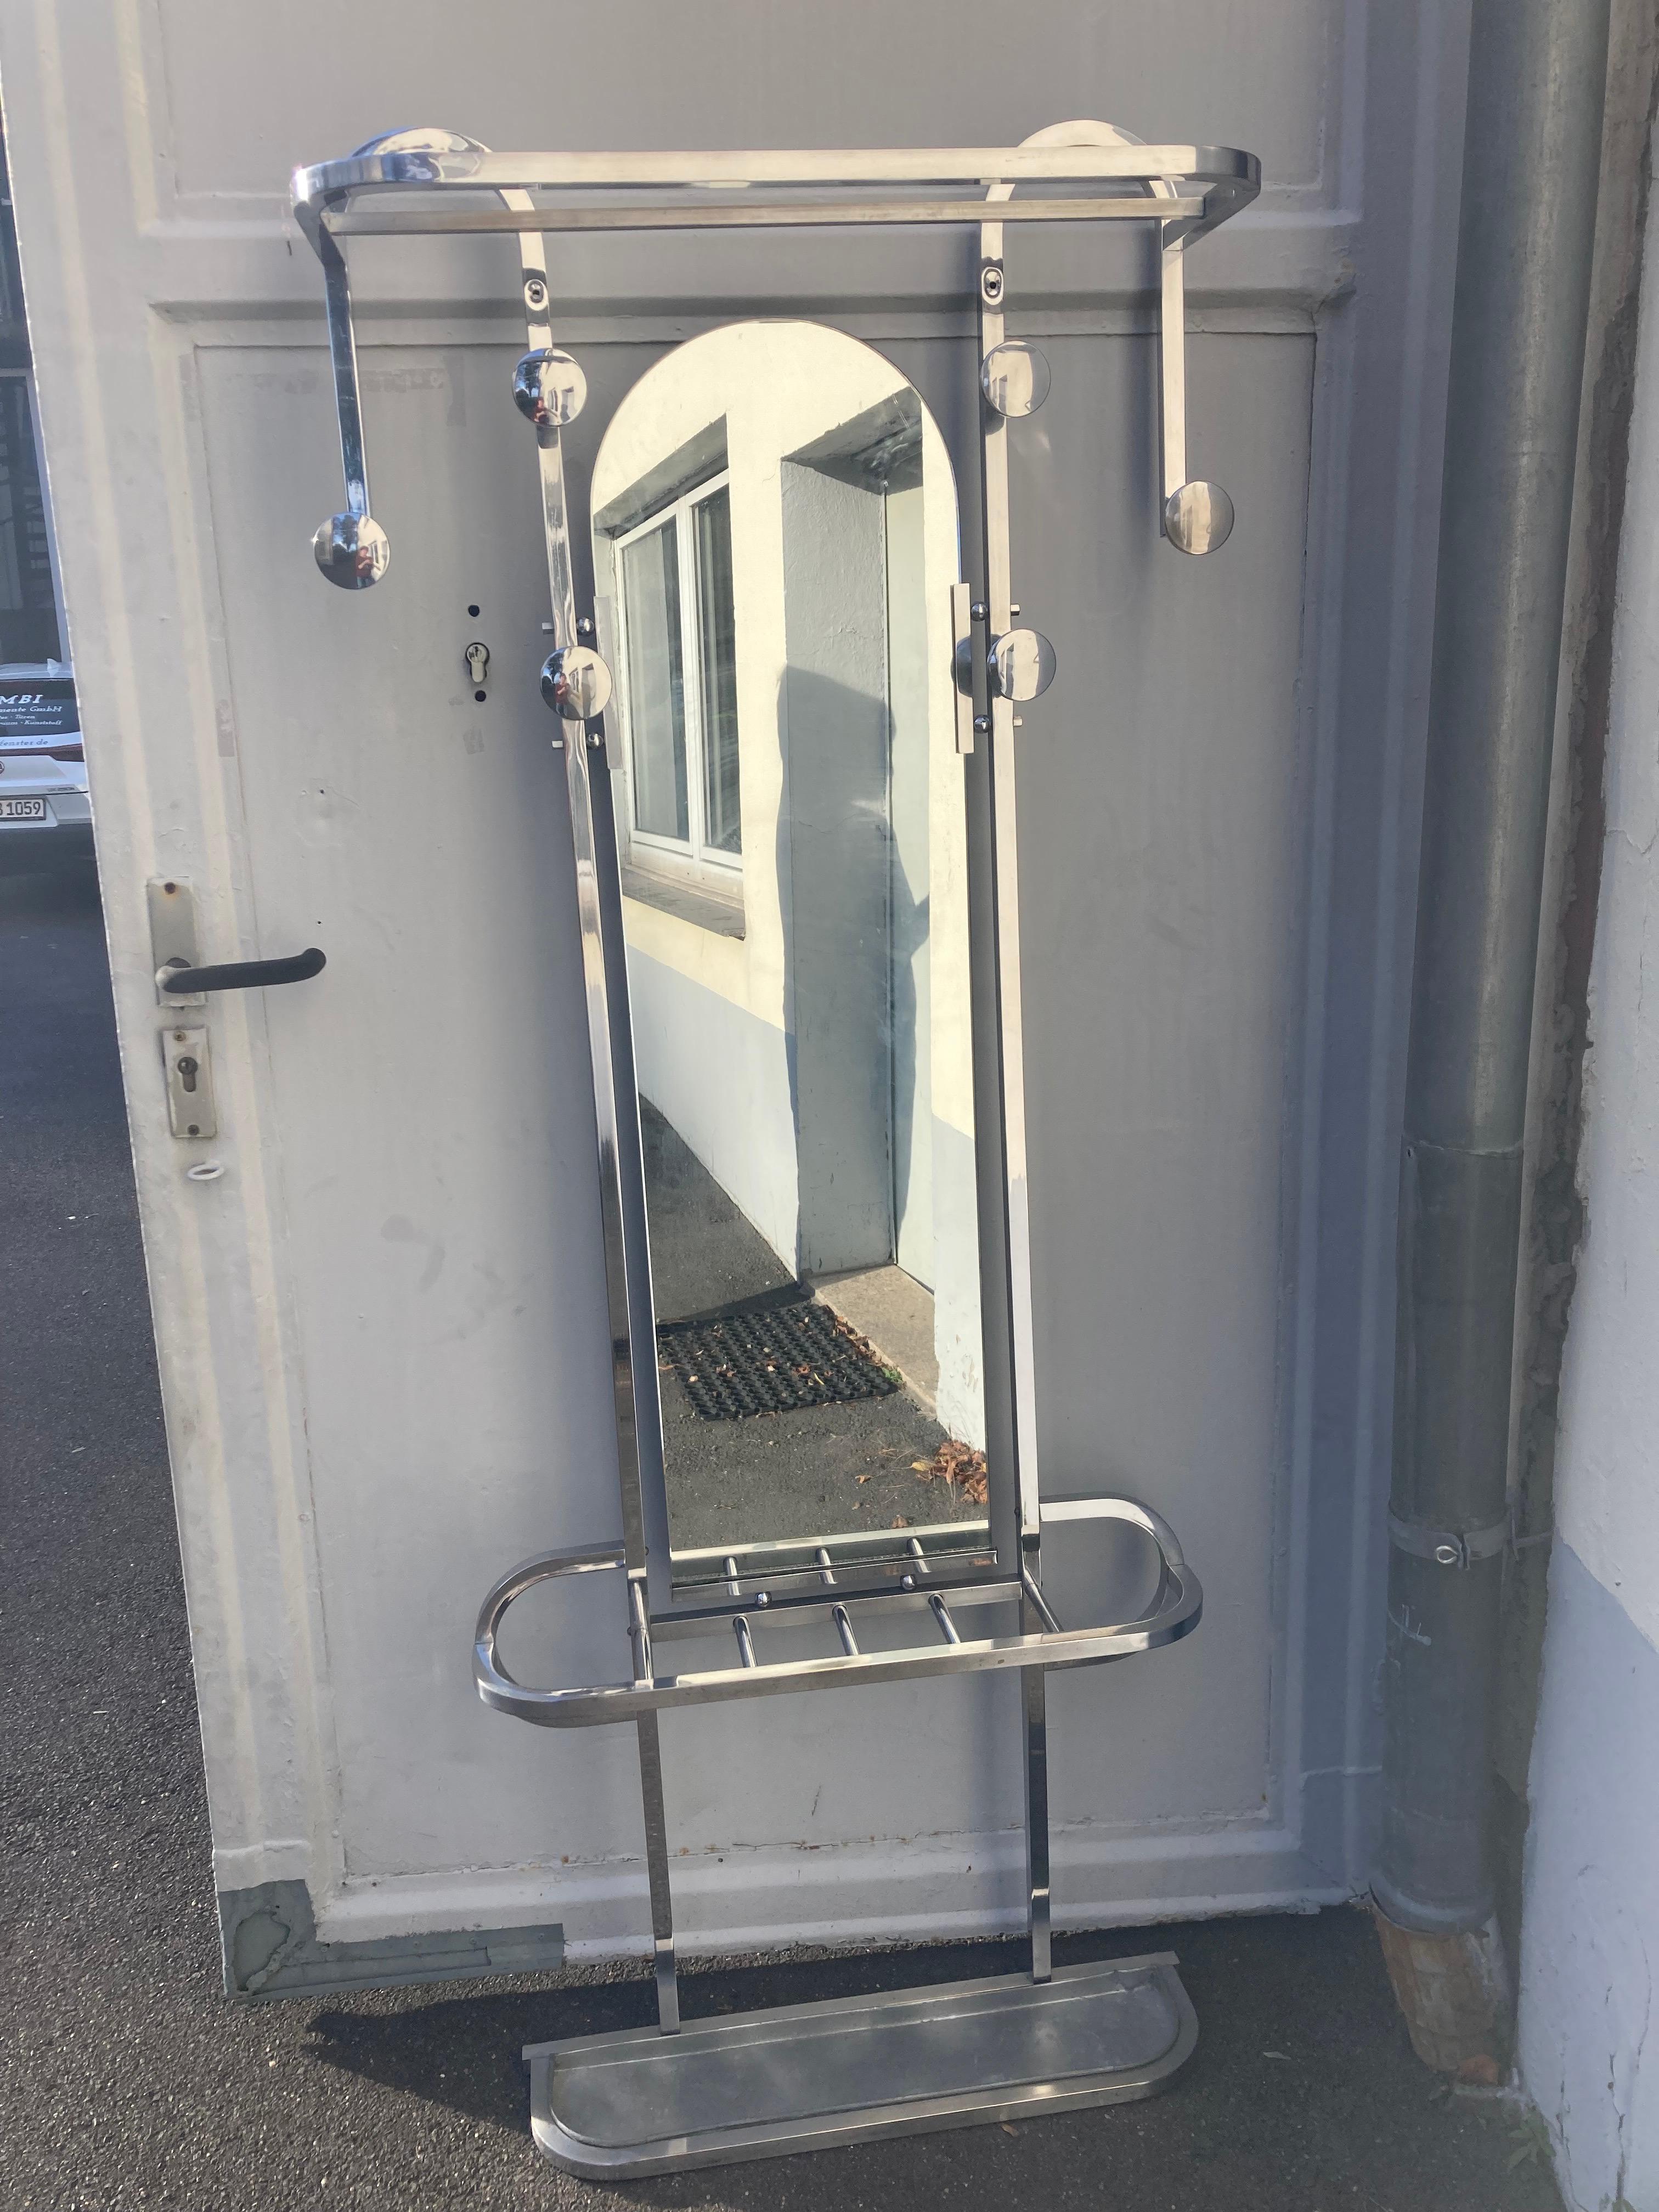 French Art Déco coat rack. Chrome plated. 1930s. Mirror glass.
Square tube chrome plated. The coat rack is except for a small rubbed spot in the chrome (see photo) in pristine thirties condition with slight signs of use commensurate with its age.